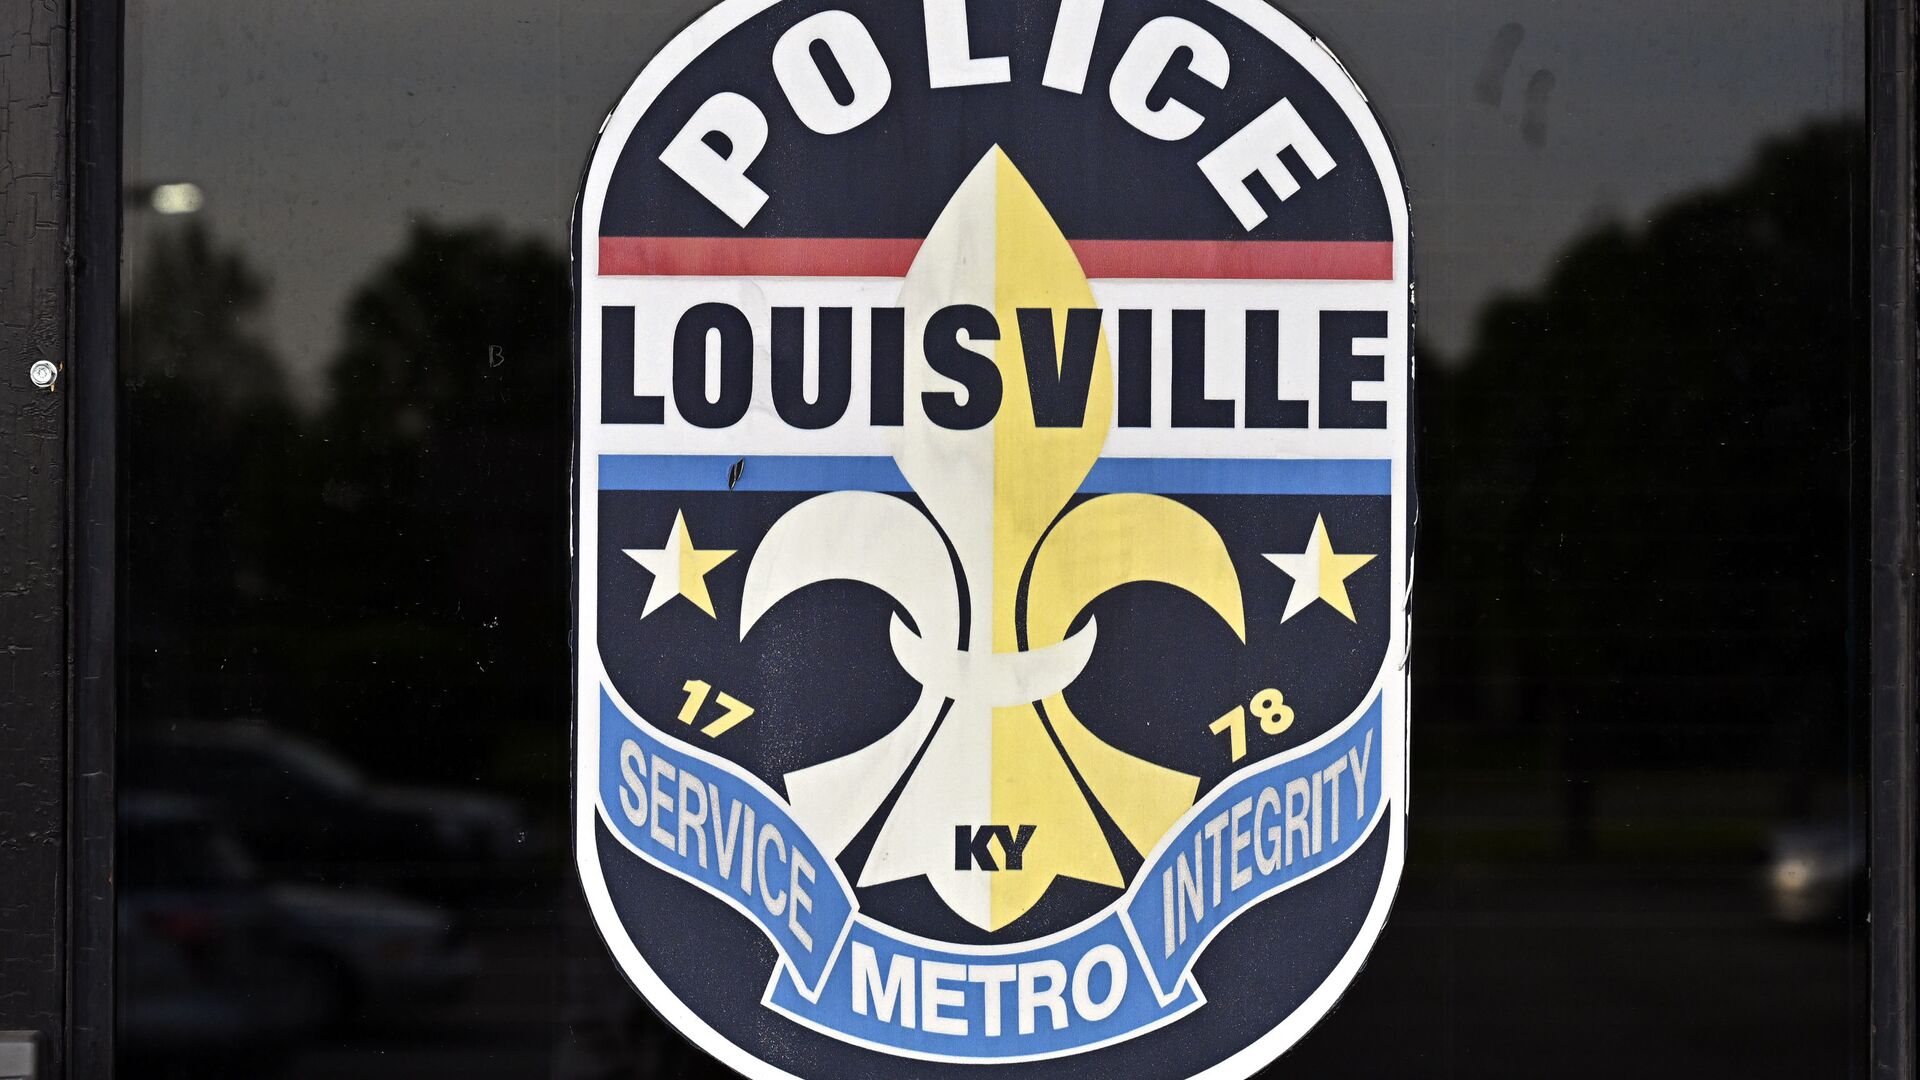 Louisville police routinely violate civil rights, U.S. Attorney